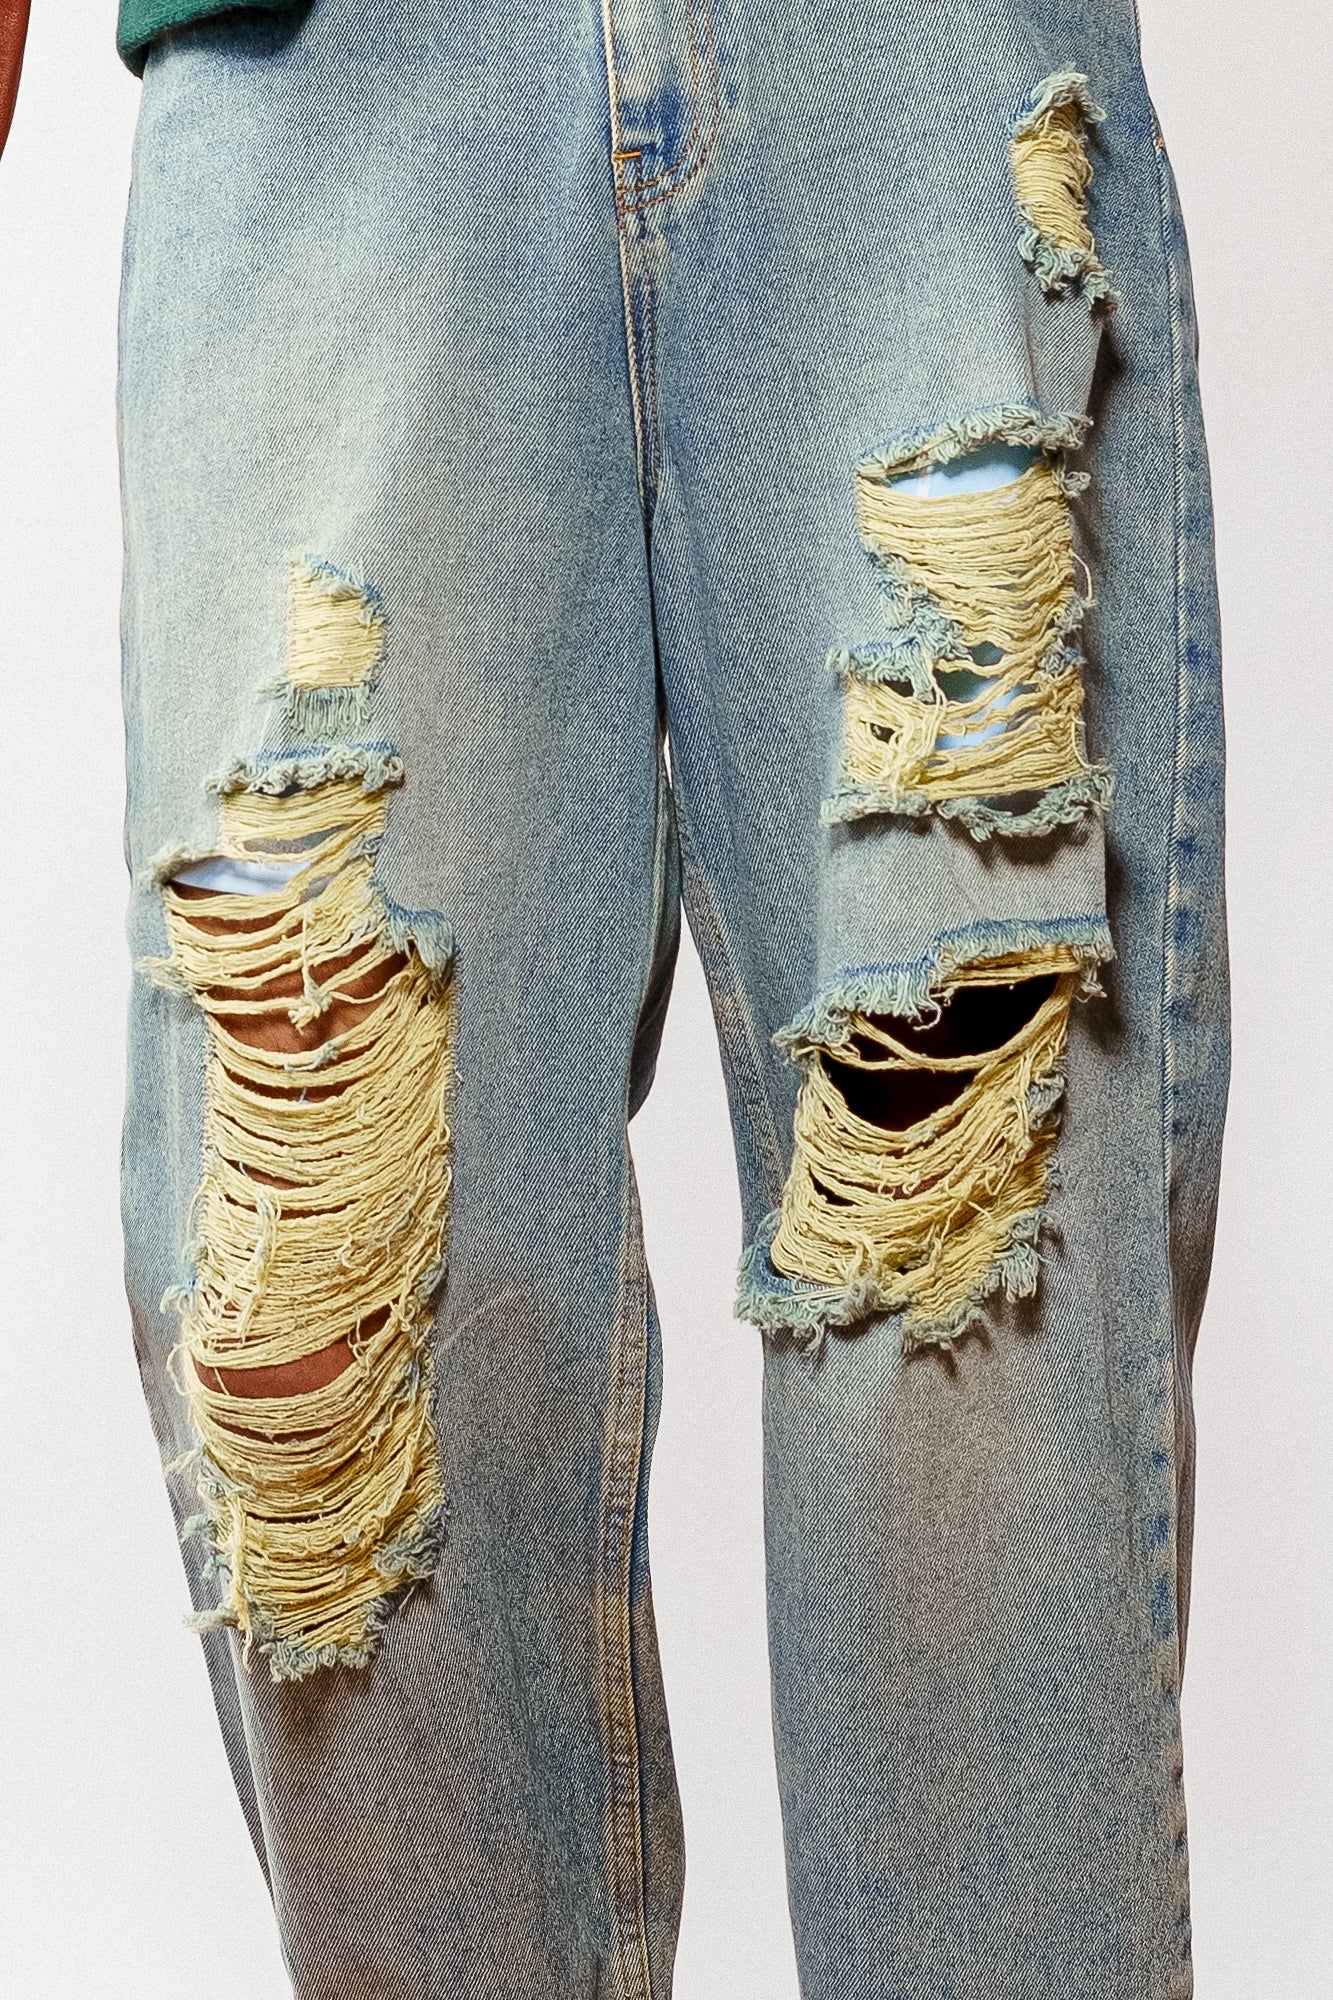 Men's Blue Cotton Ripped Ripped Jeans